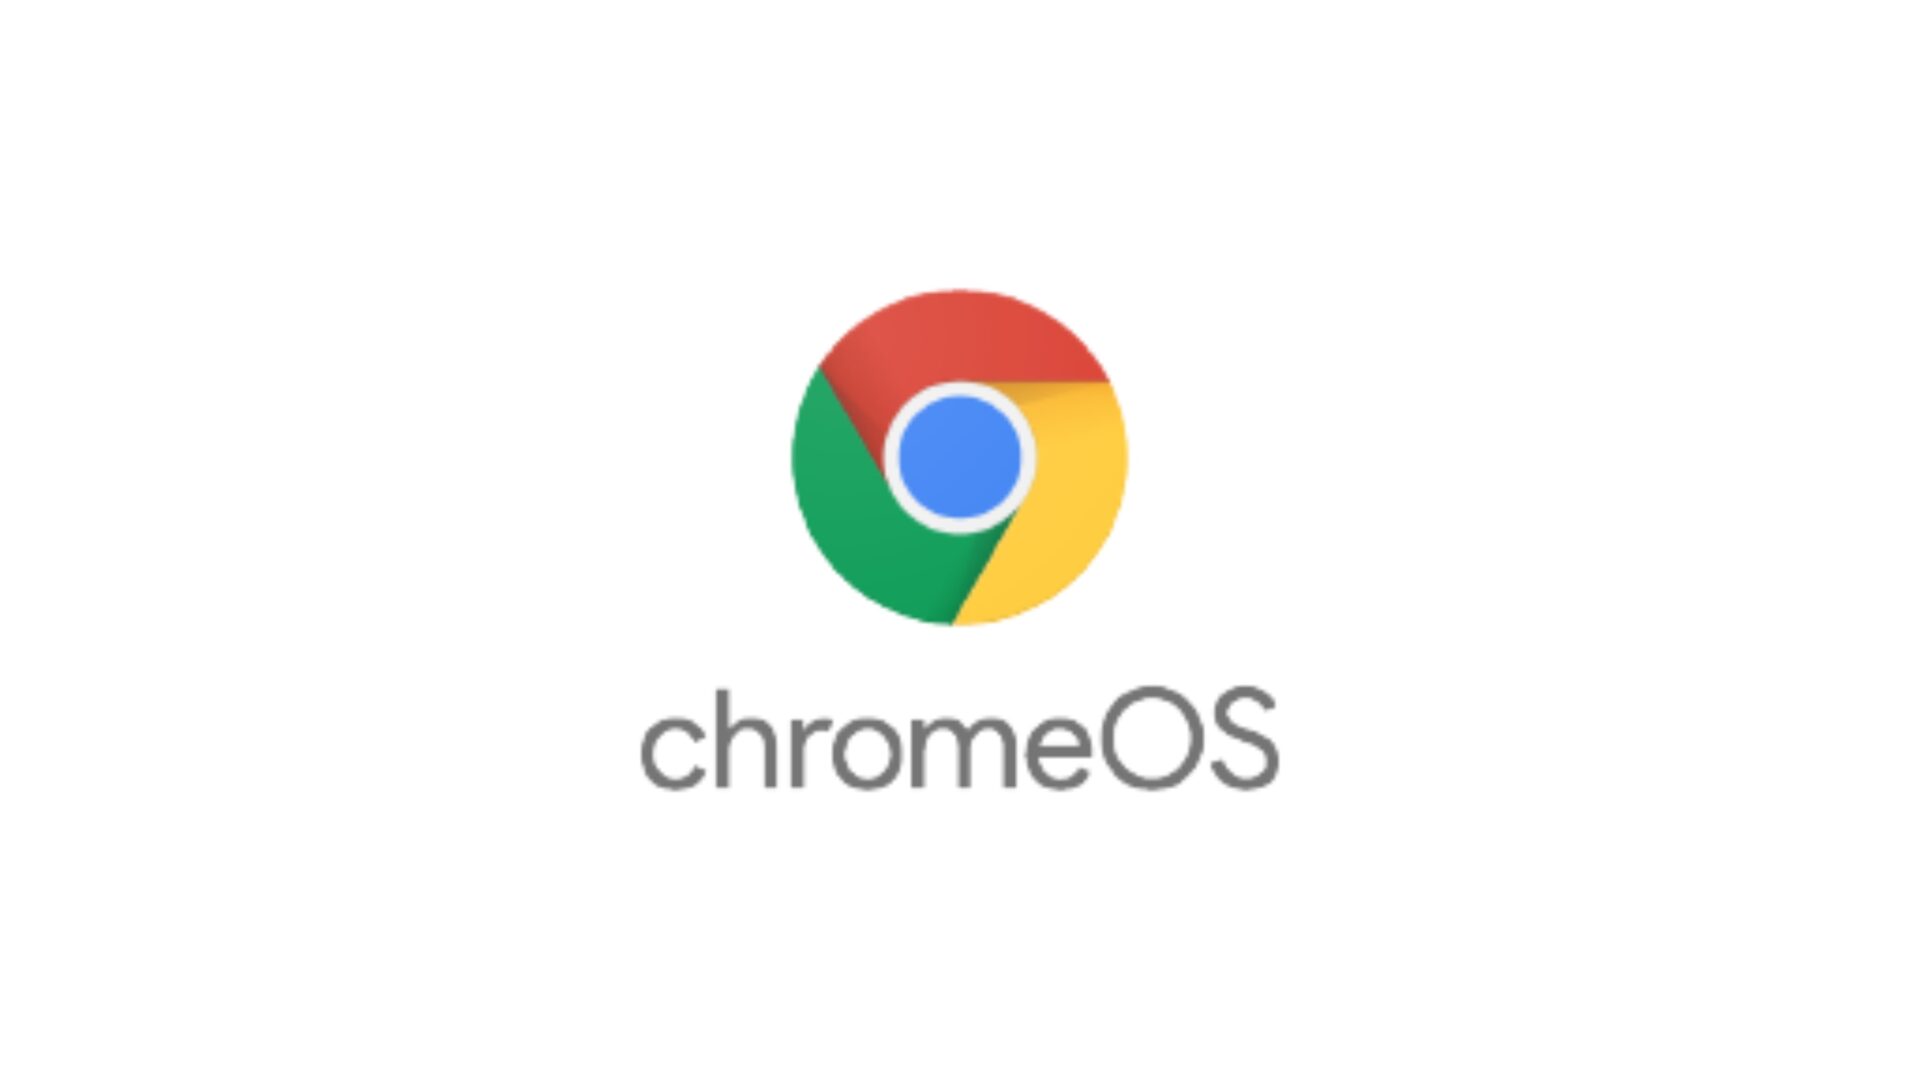 Google Chrome OS stable update releases will shift to a 4week cycle in